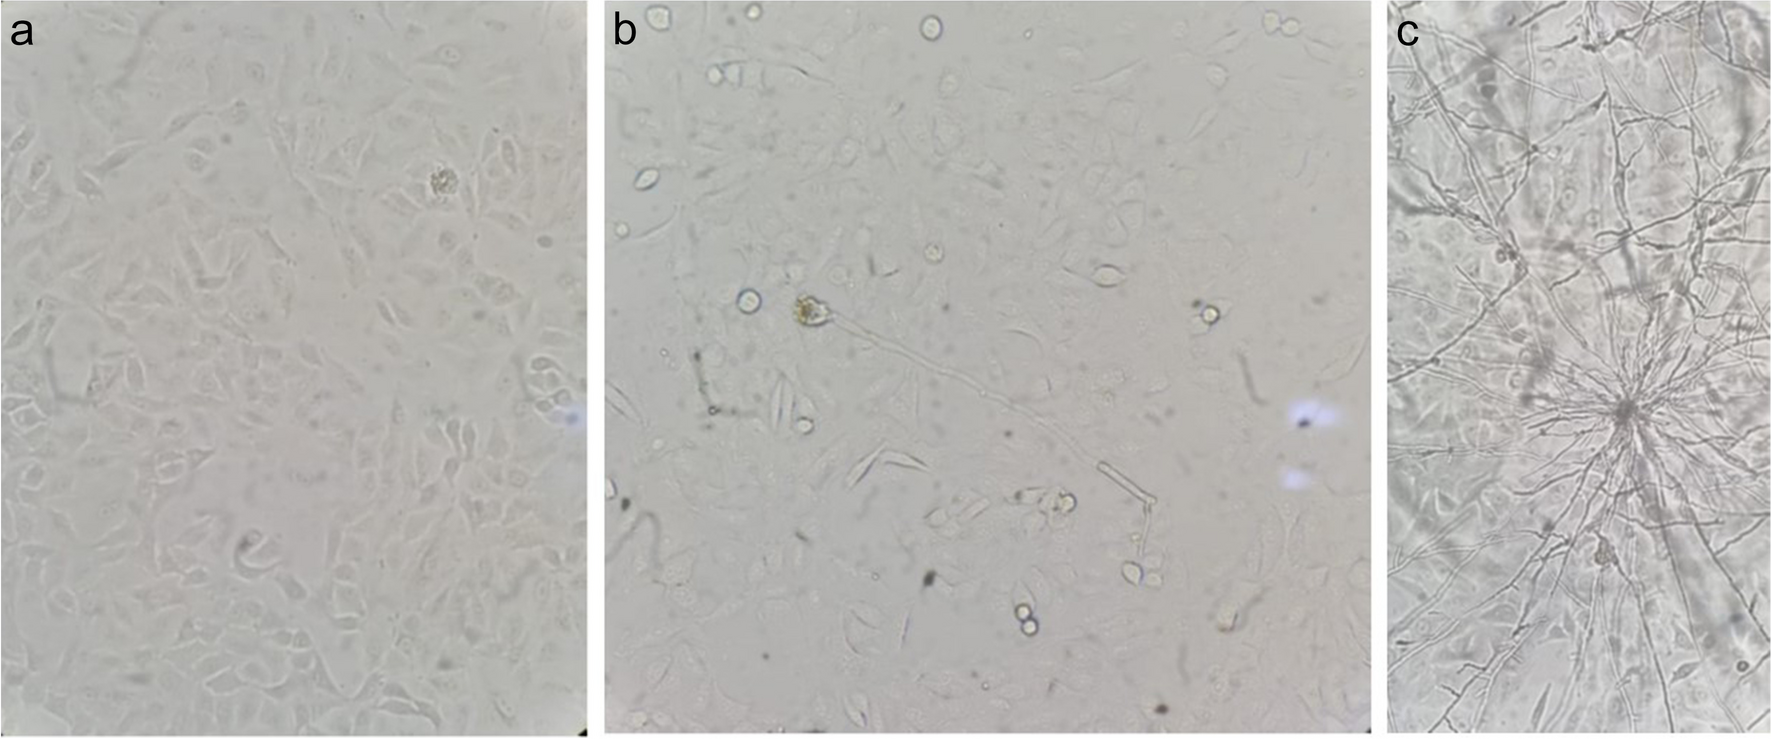 MicroRNA expression profile of alveolar epithelial cells infected with Aspergillus fumigatus